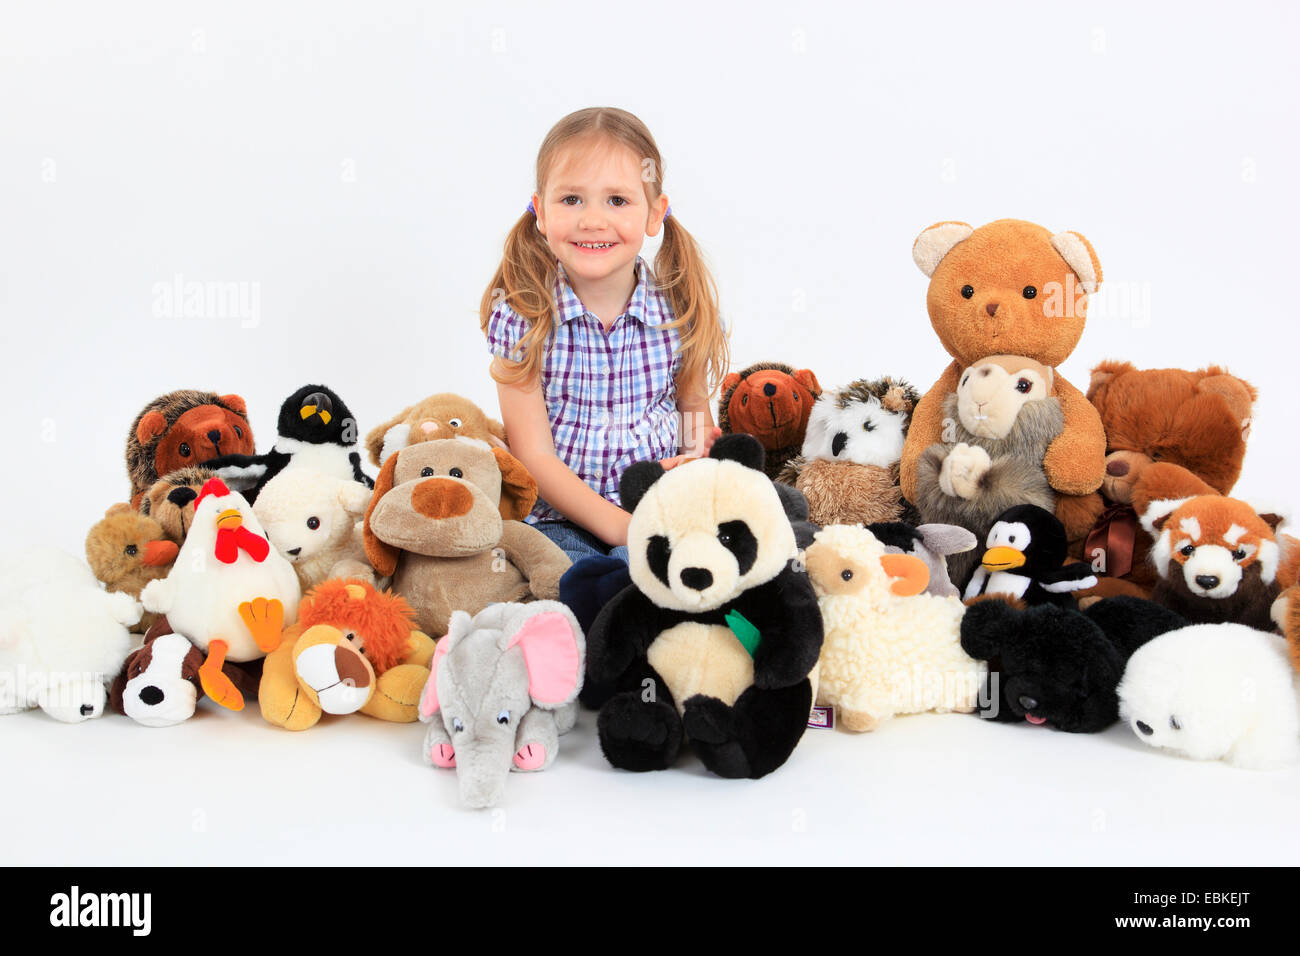 little happy girl playing with soft toys Stock Photo